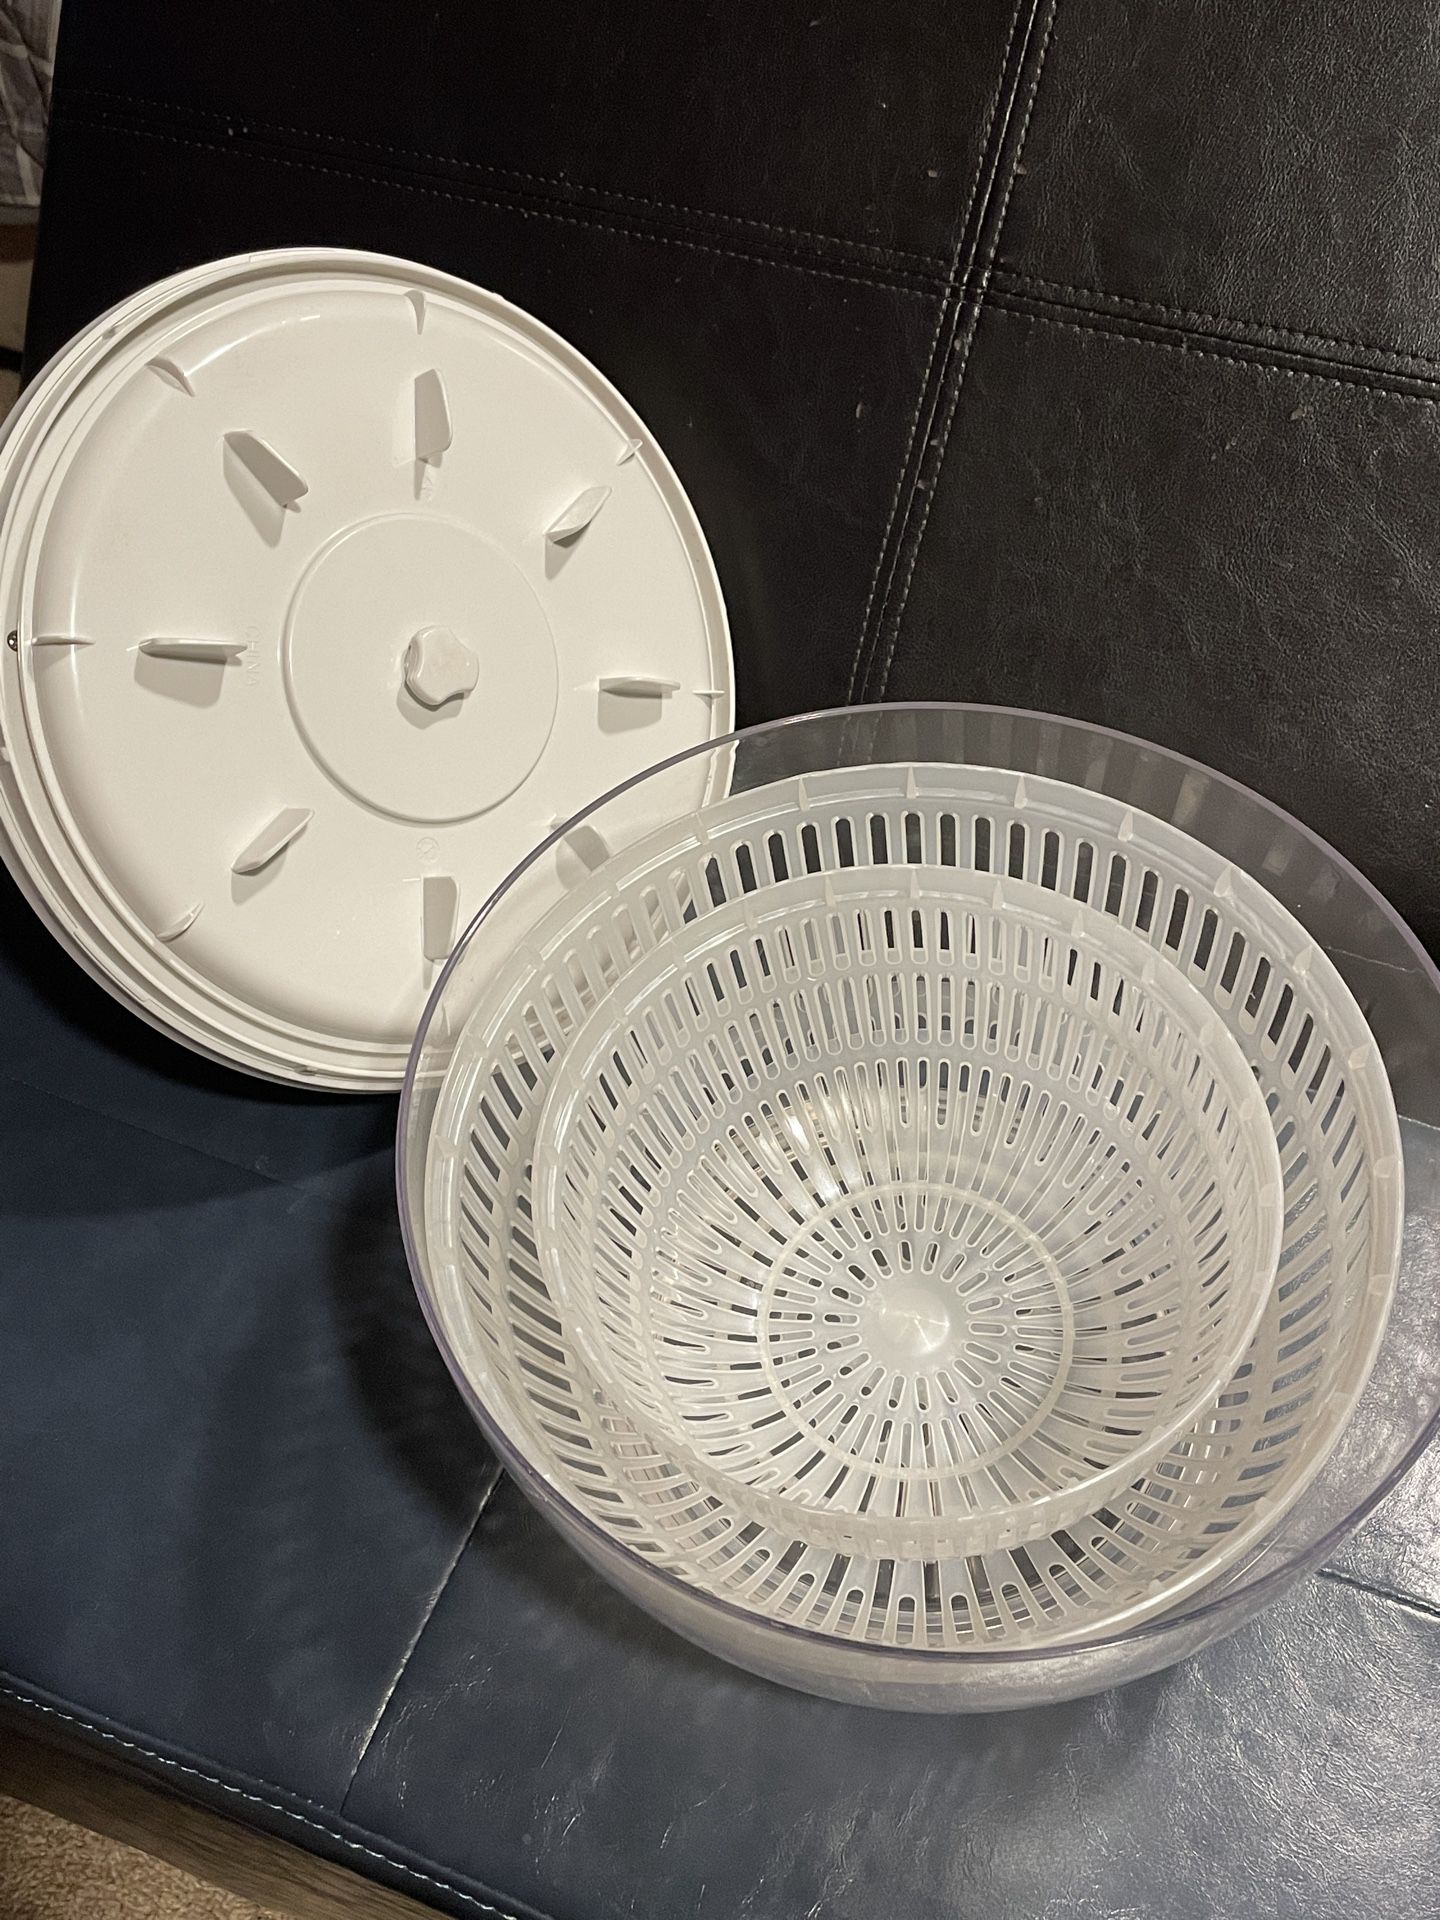 Cuisinart Salad Spinner Big for Sale in Bloomingdale, IL - OfferUp